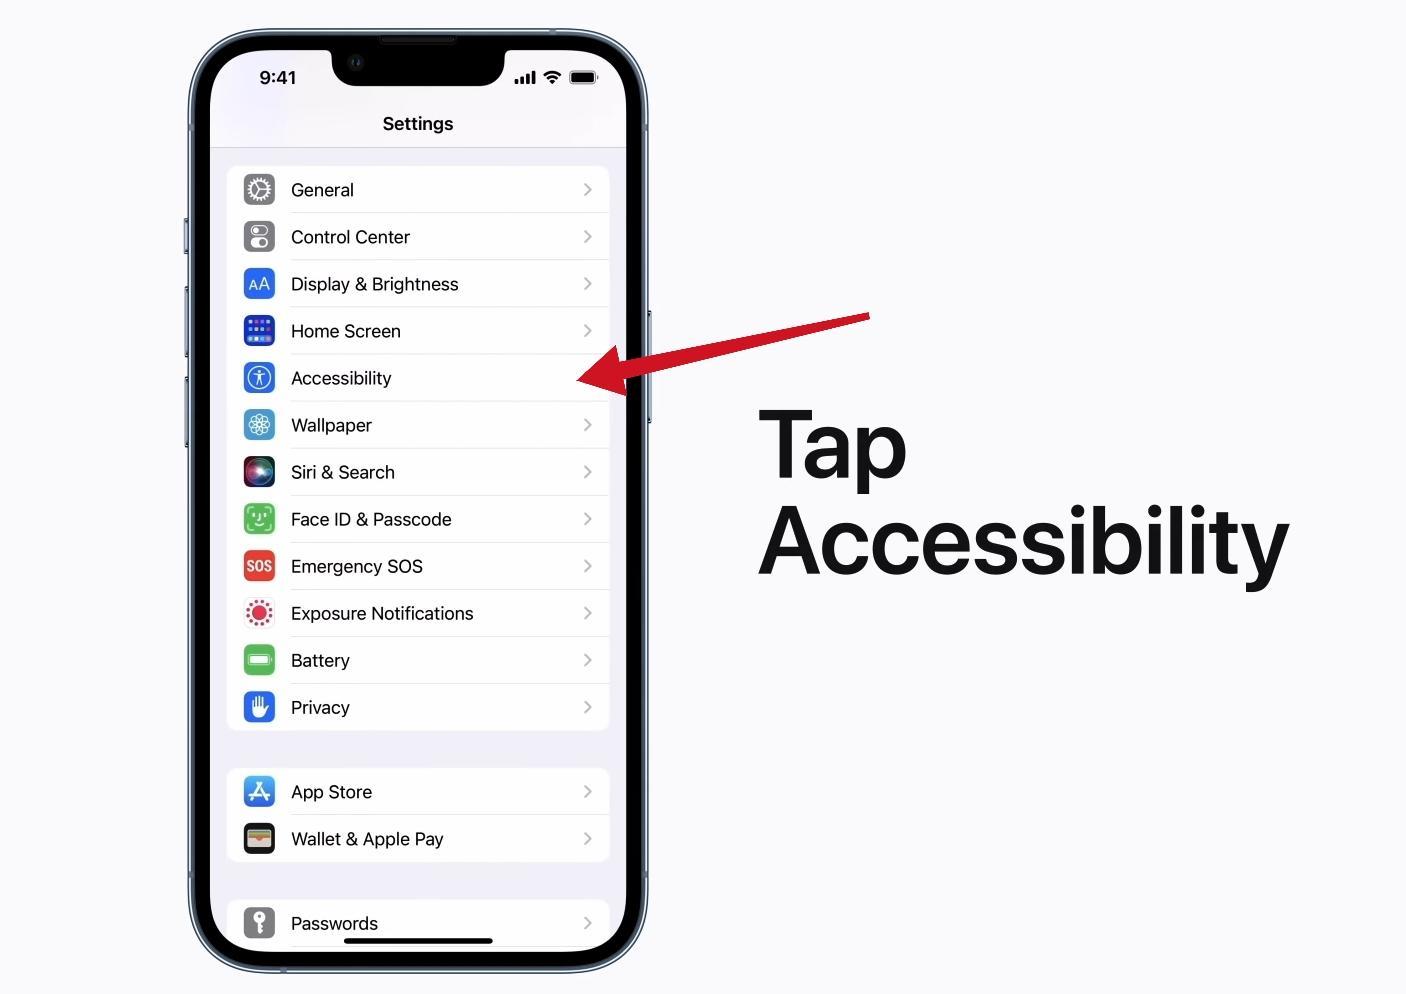 Navigate to Accessibility